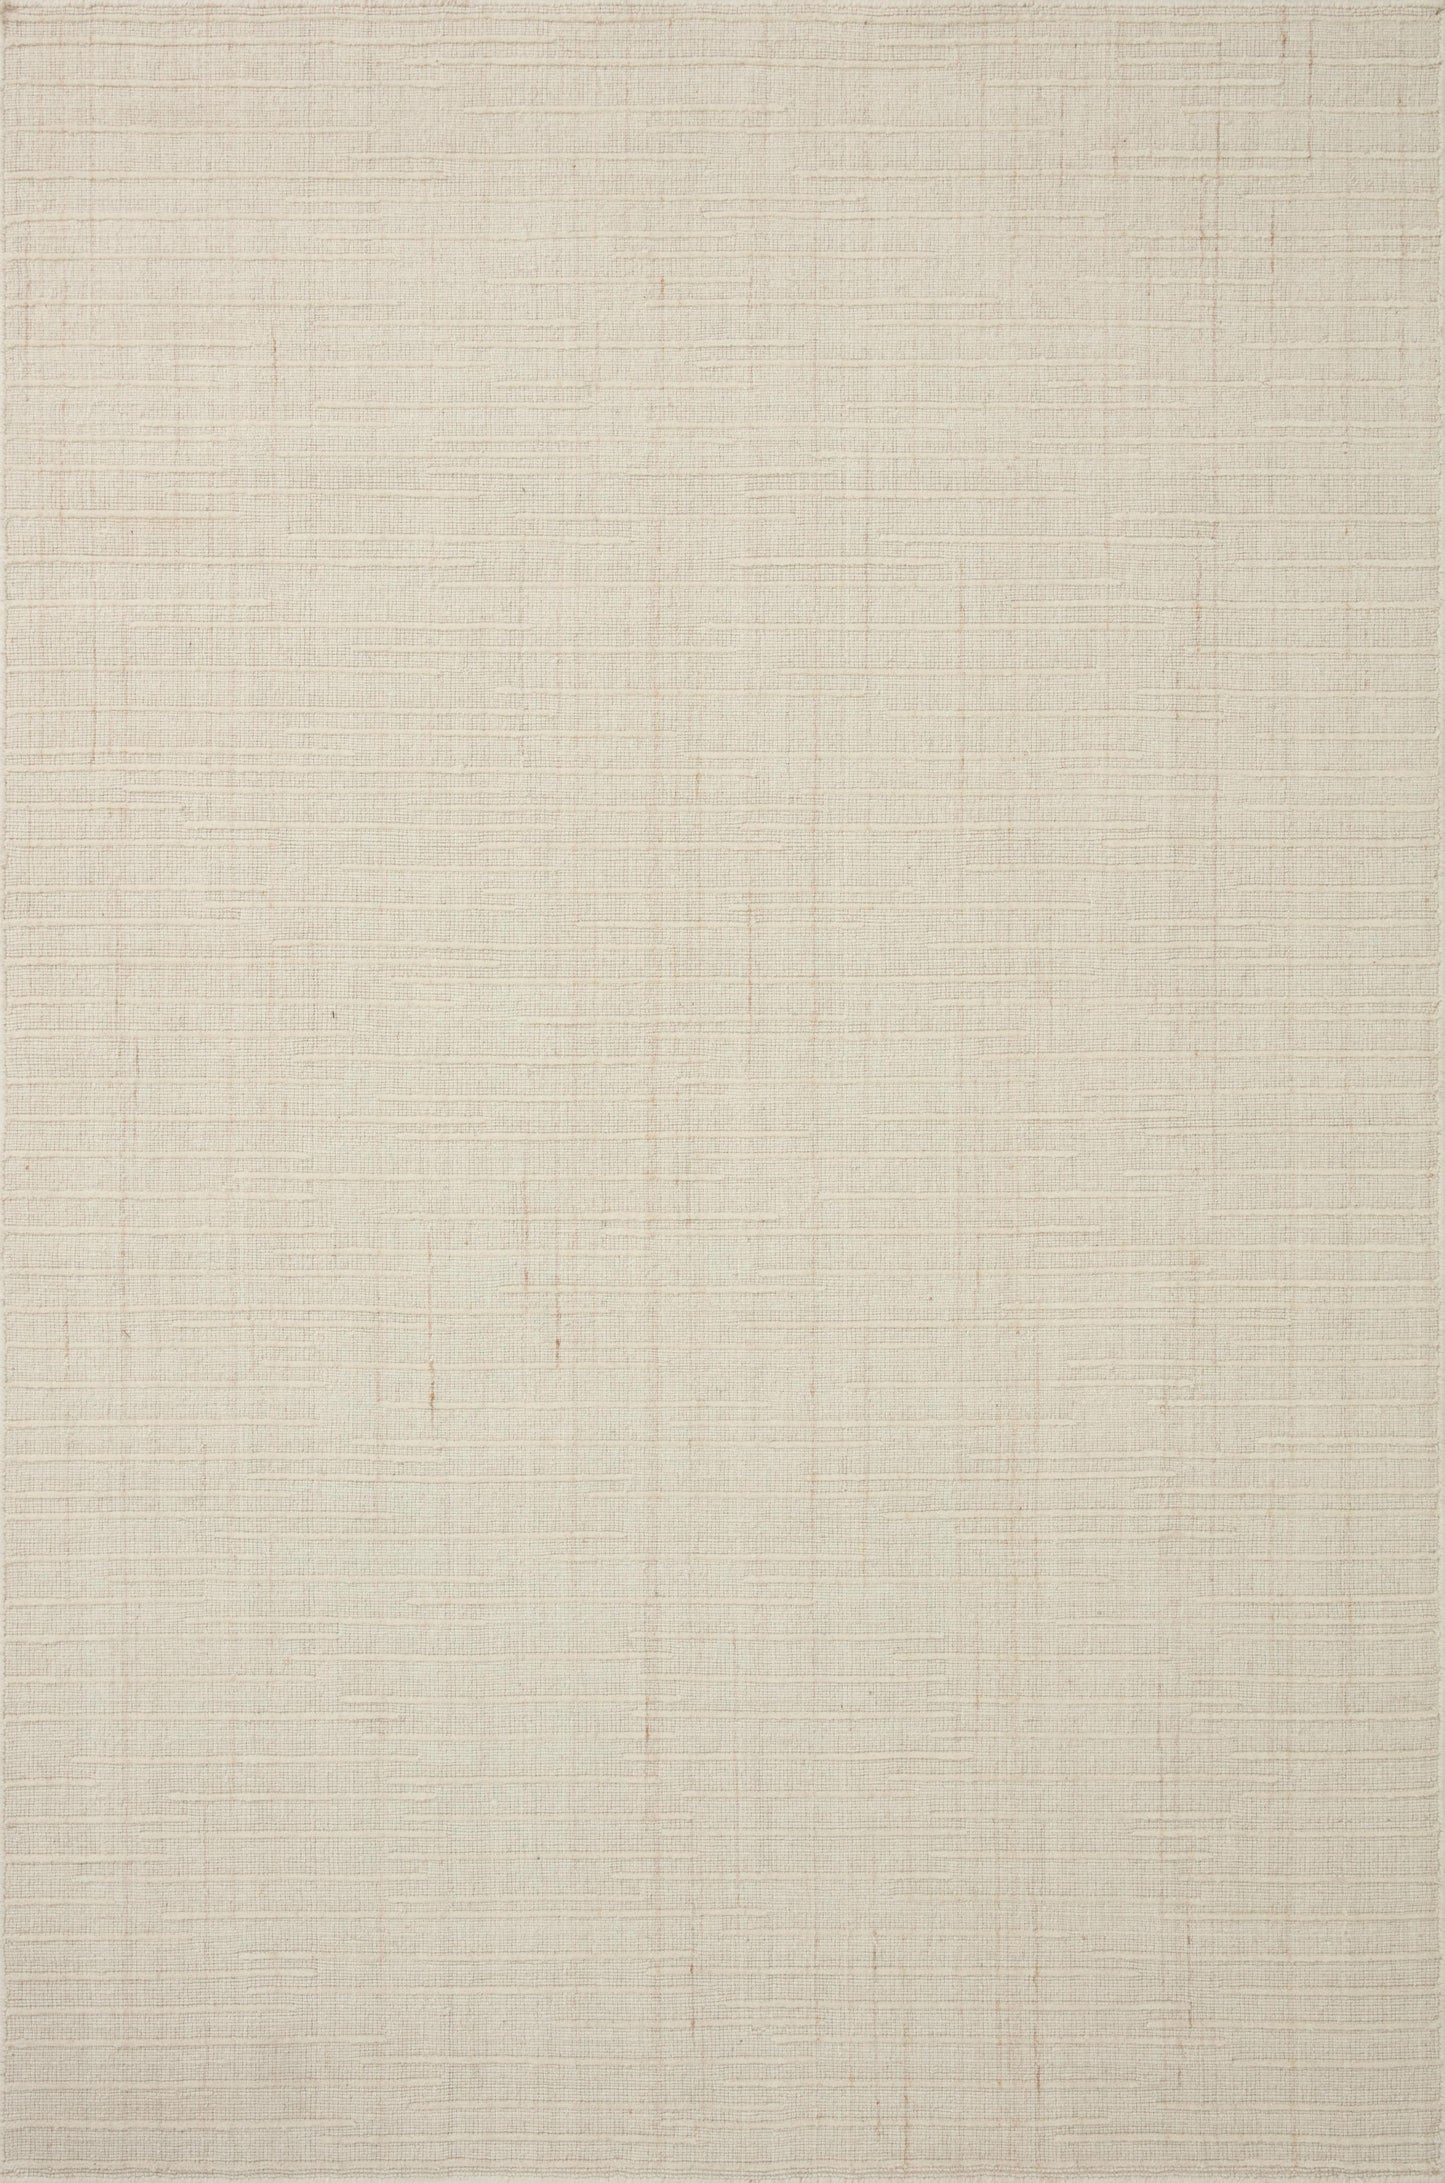 A picture of Loloi's Brooks rug, in style BRO-01, color Ivory